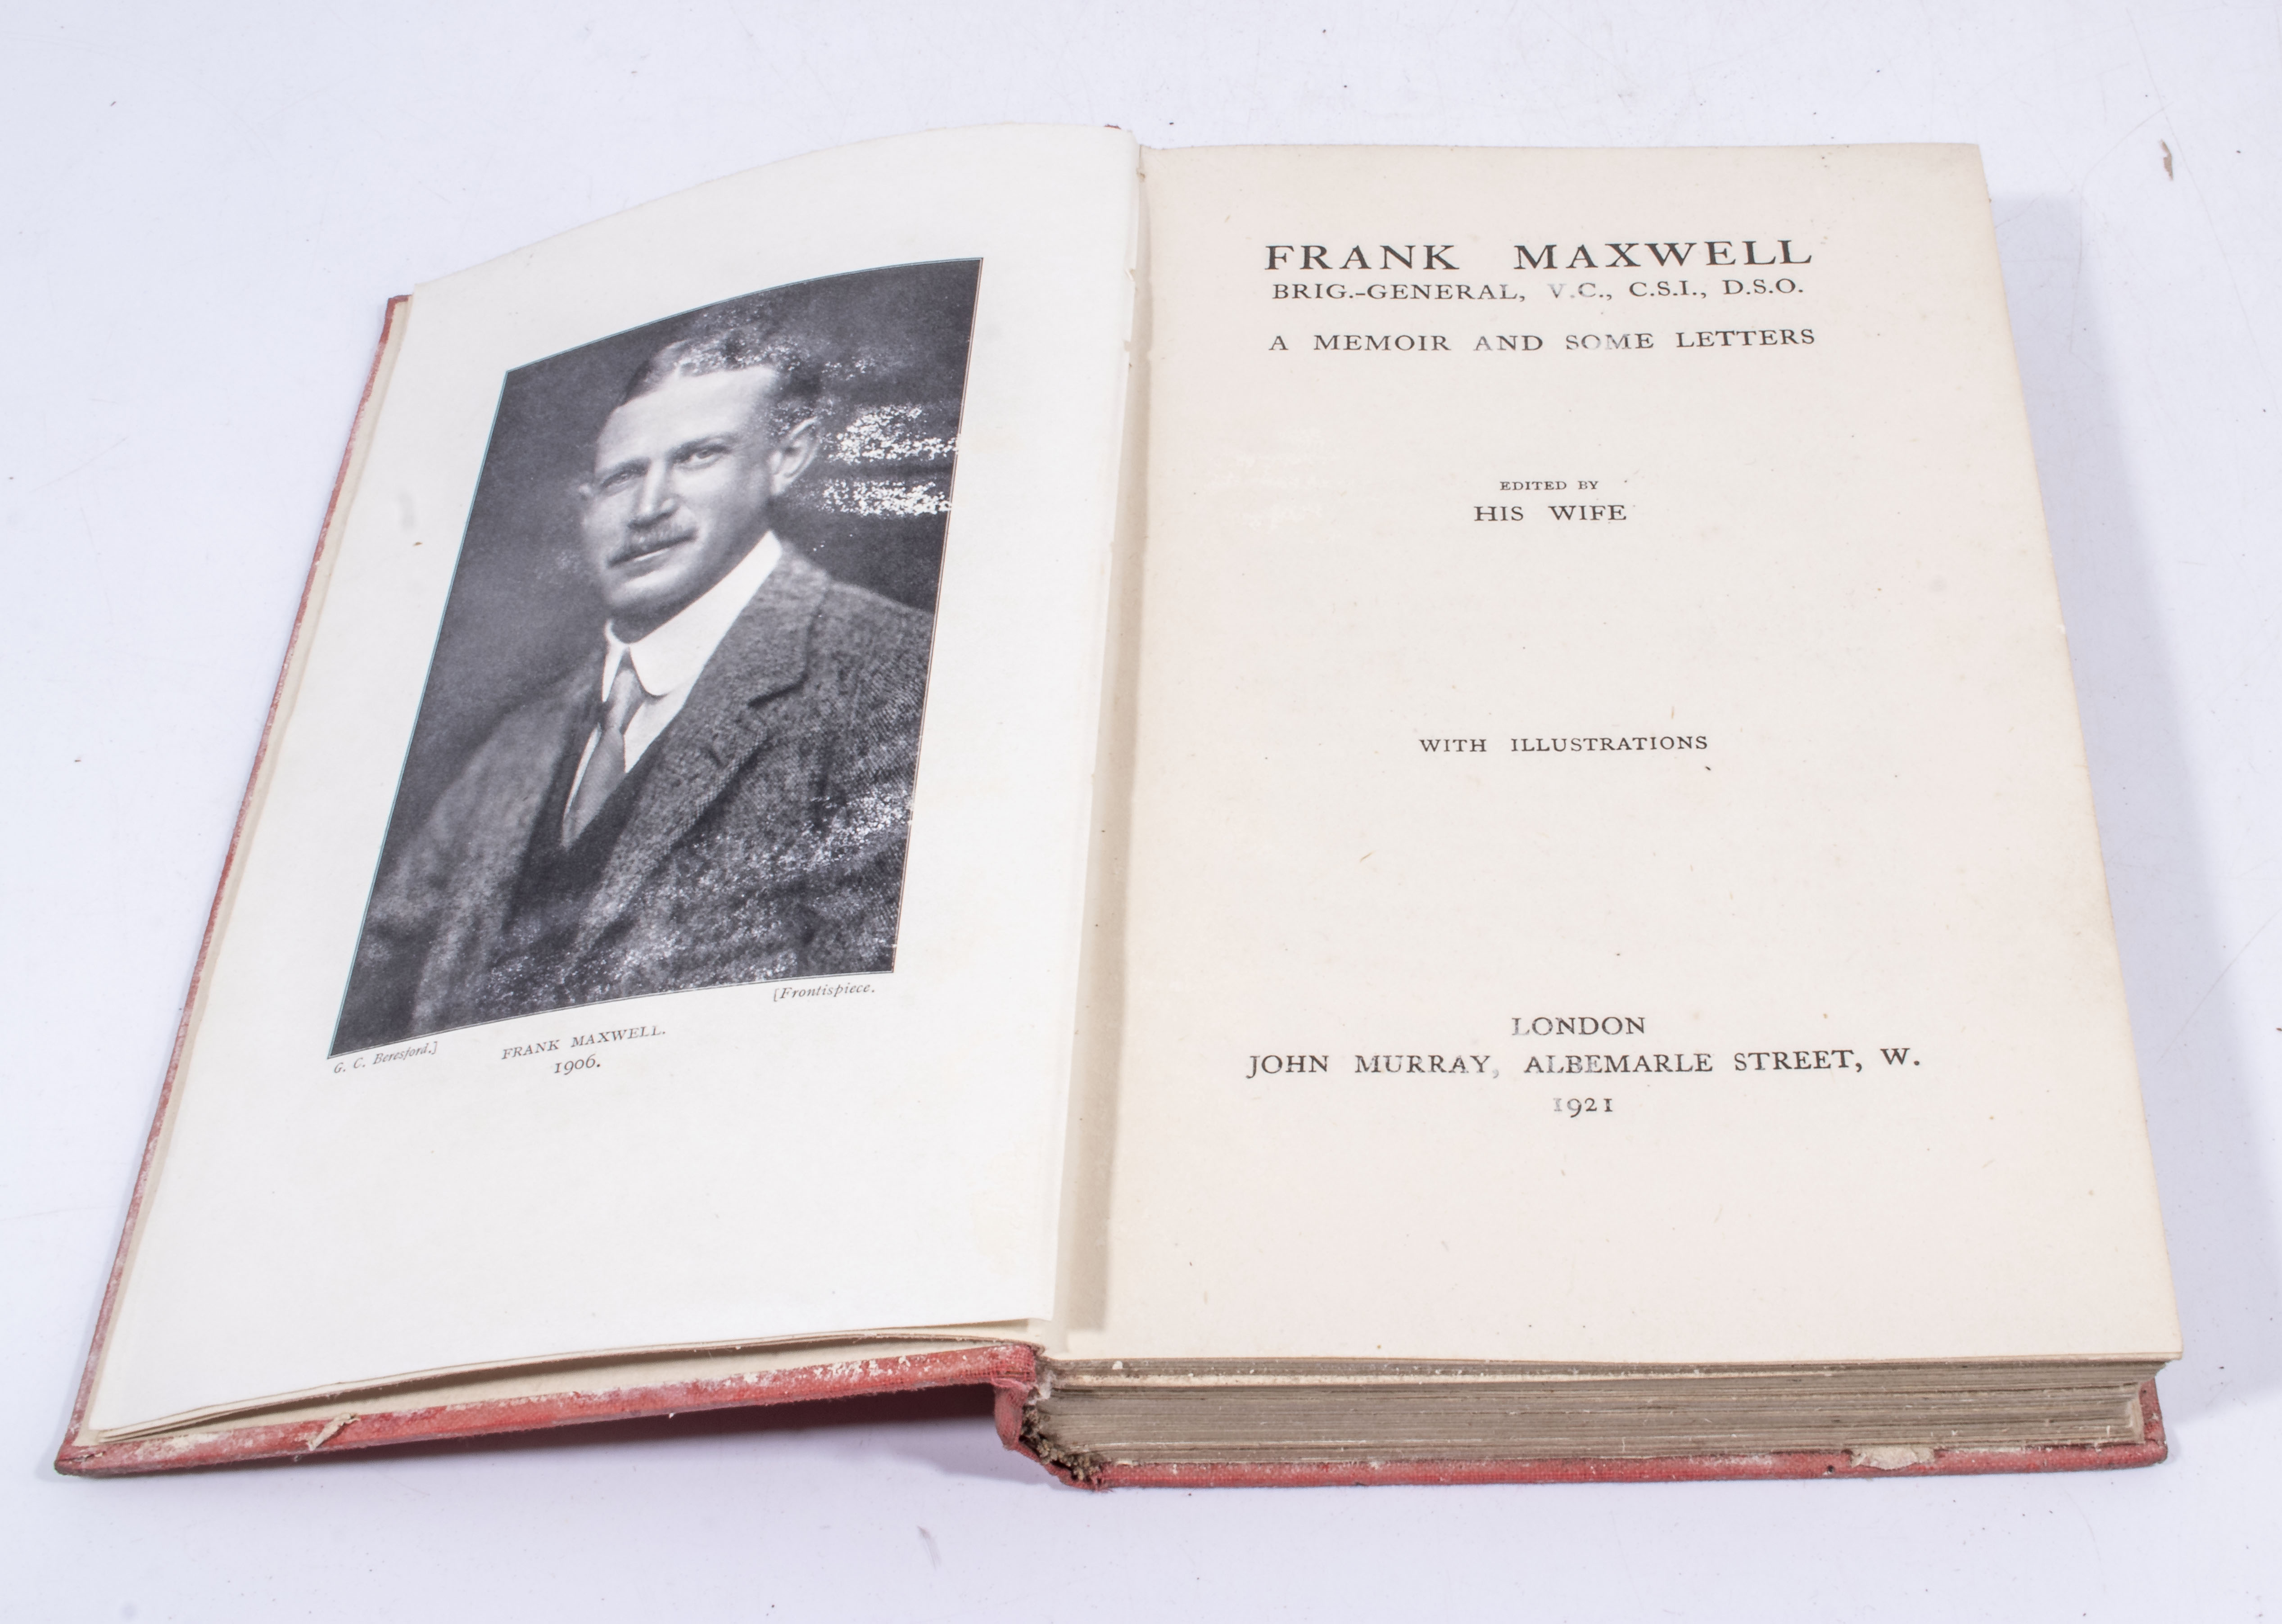 Frank Maxwell A Memoir and some letters edited by his wife Provenance: Being the property of the - Image 3 of 5